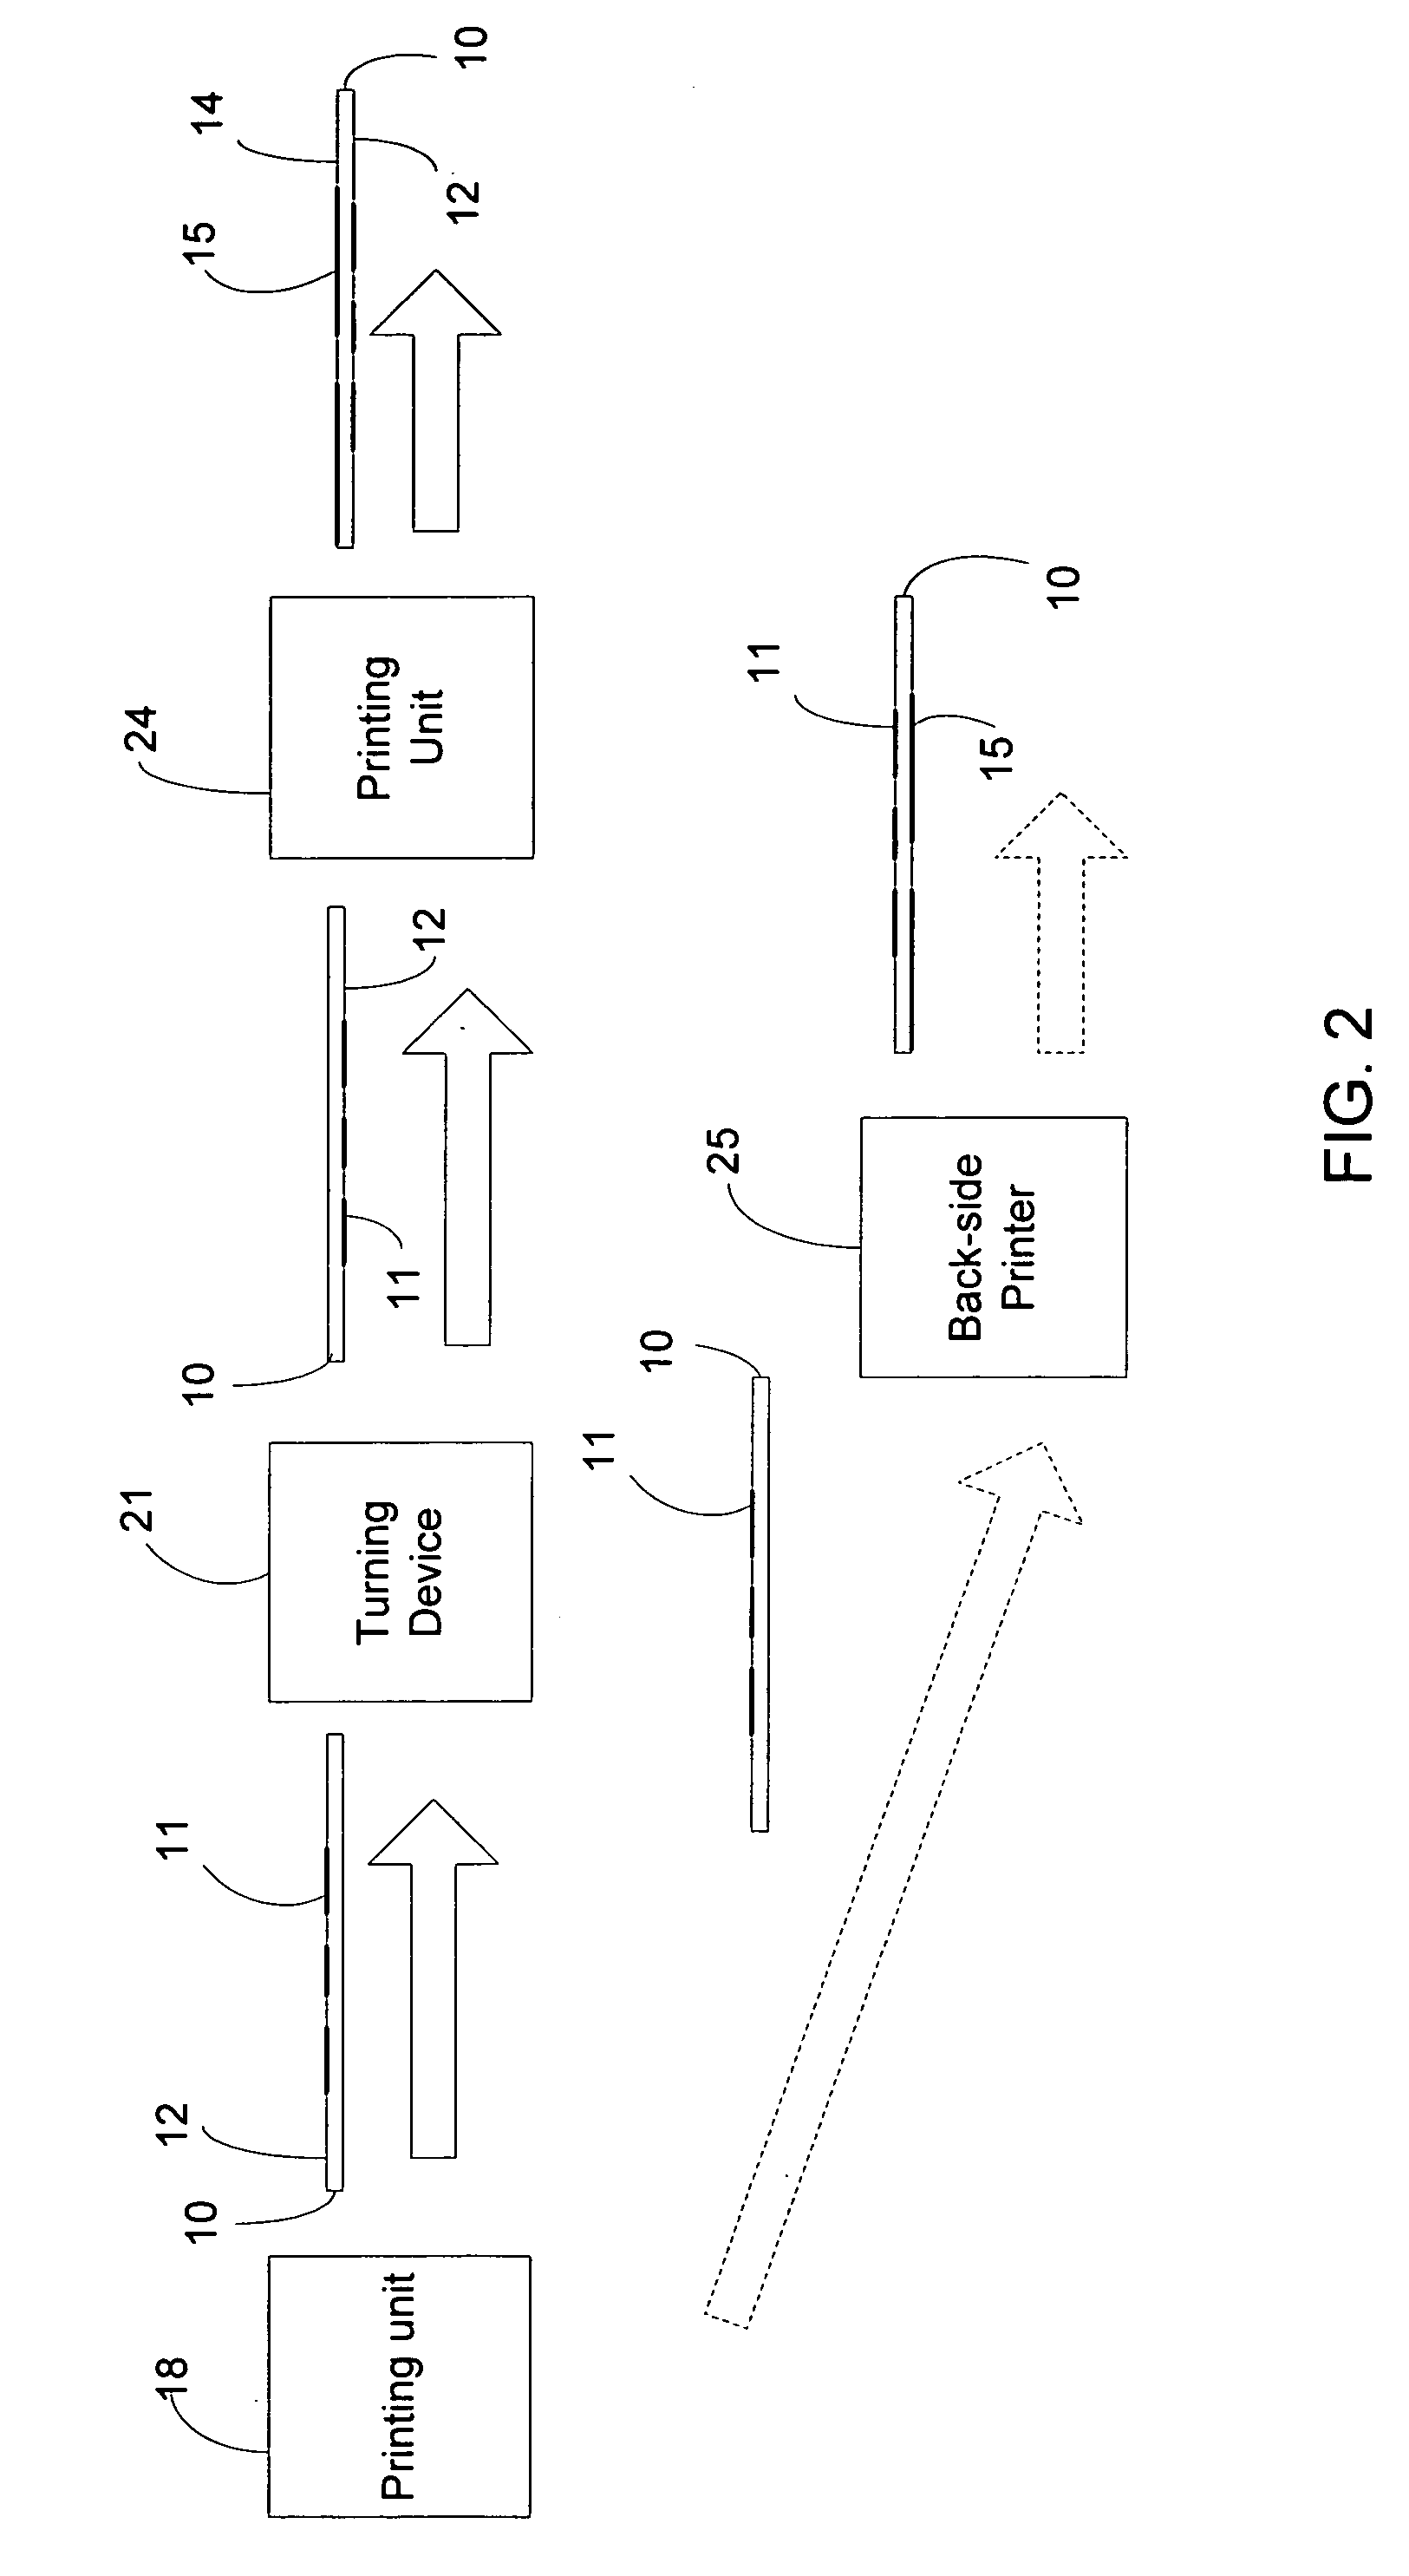 Method for printing an electronic circuit component on a substrate using a printing machine